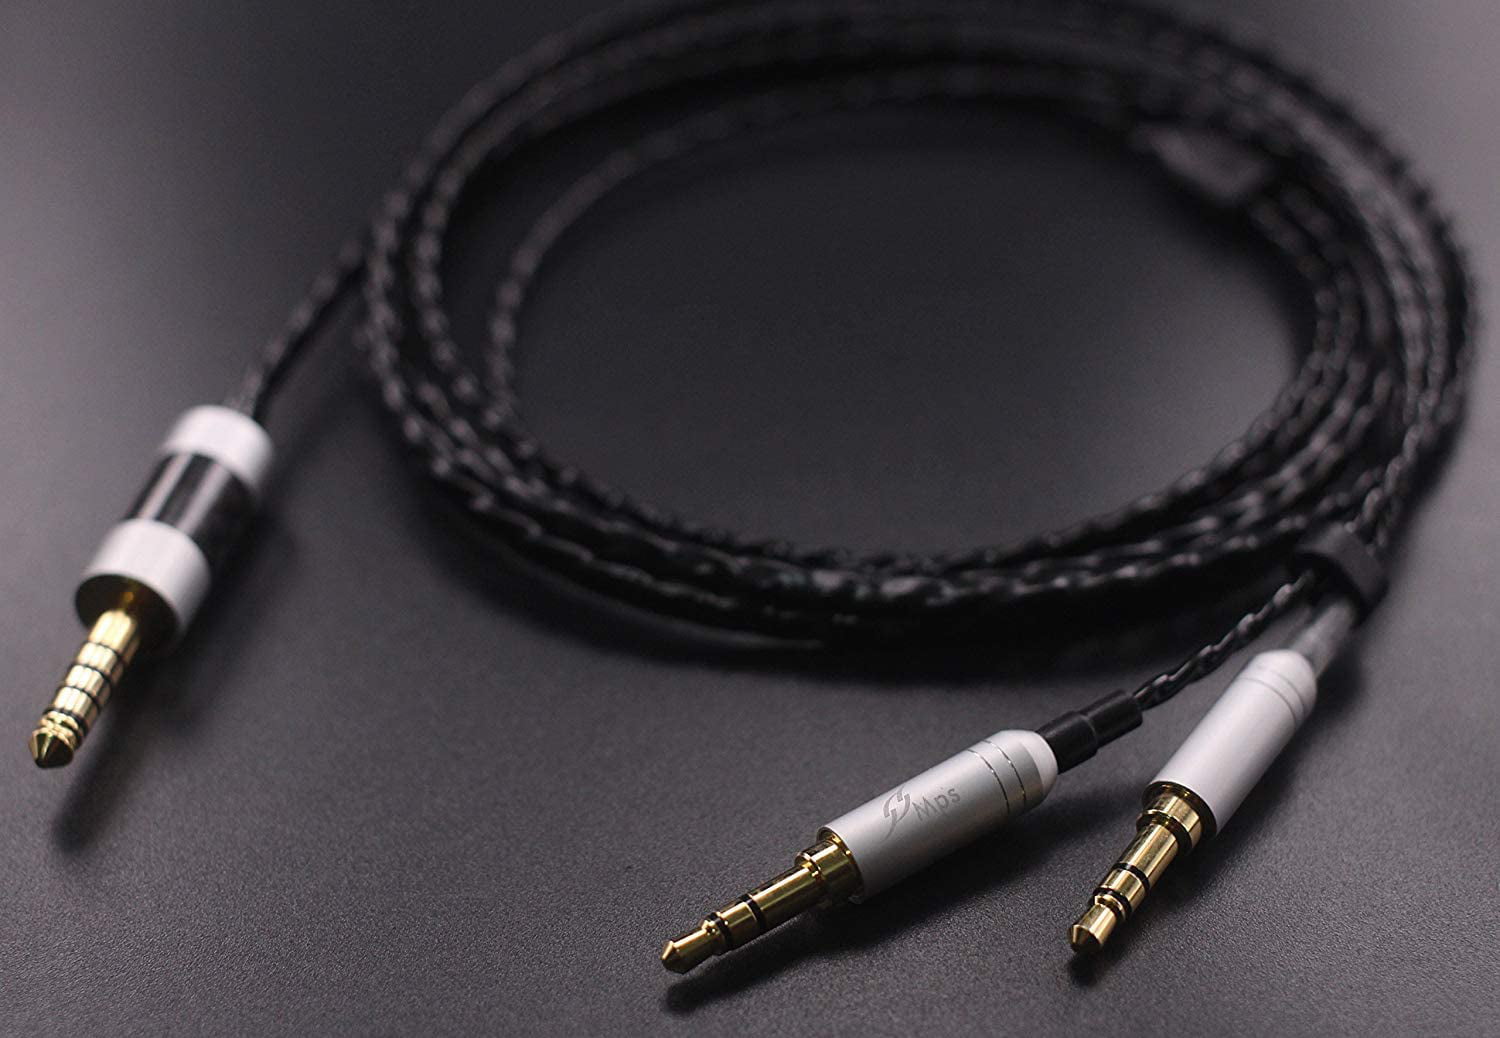 KK Cable RE-W 3.5mm to 3.5mm Audio Cable RE-W Headphone Cable 4.9ft AUX Cable 1.5M